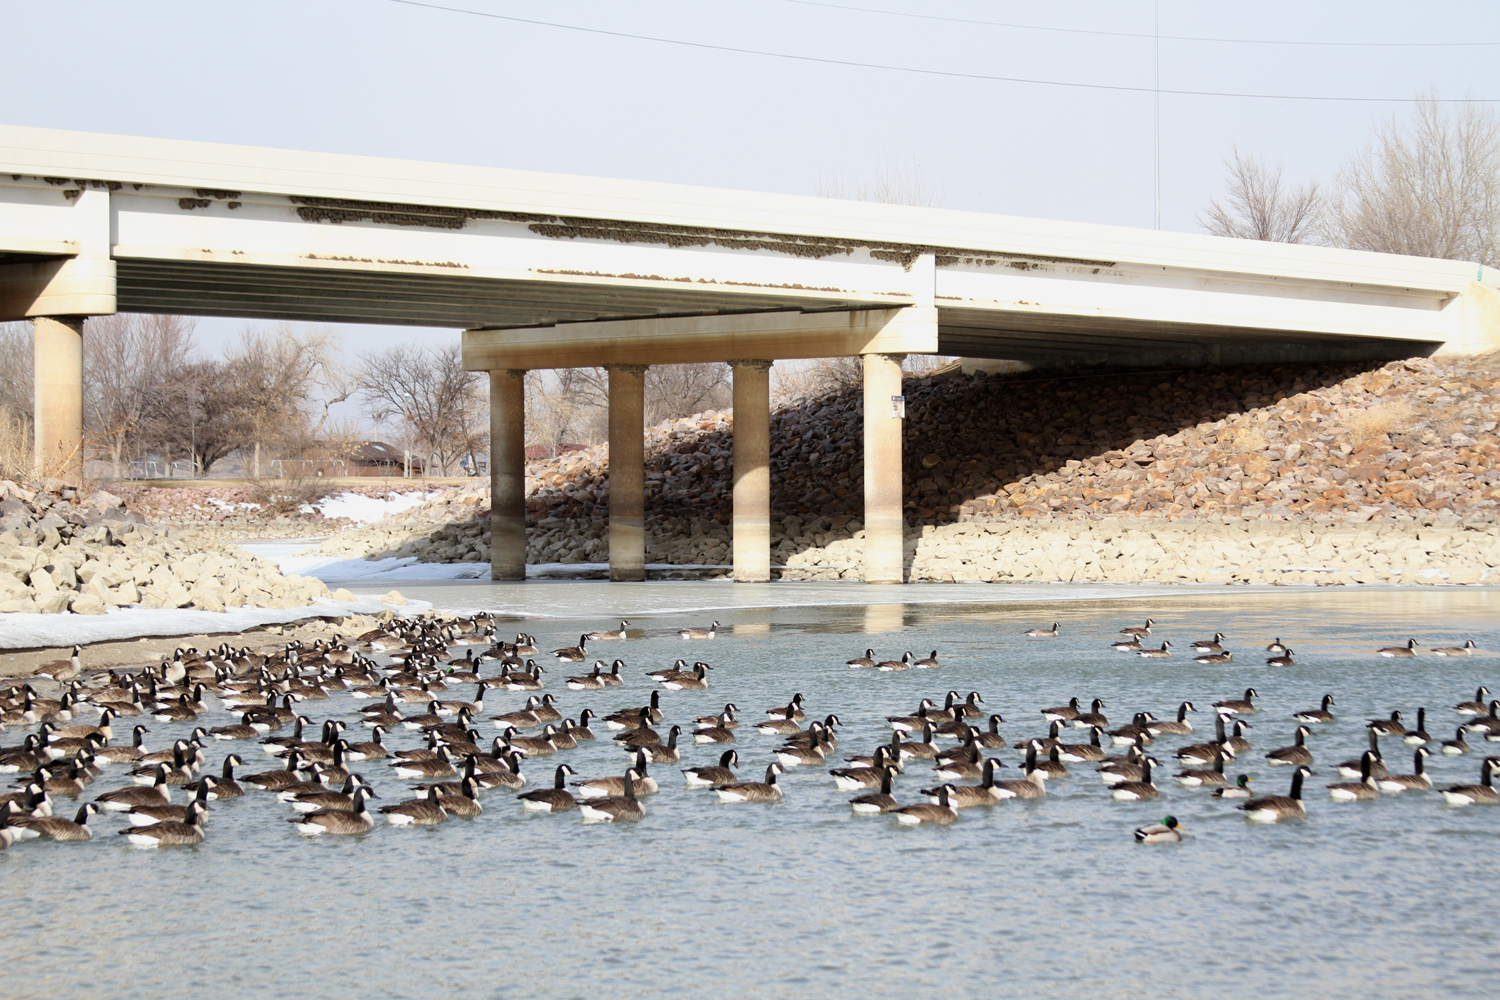 The Chamberlain community is home to hundreds of Canada geese.